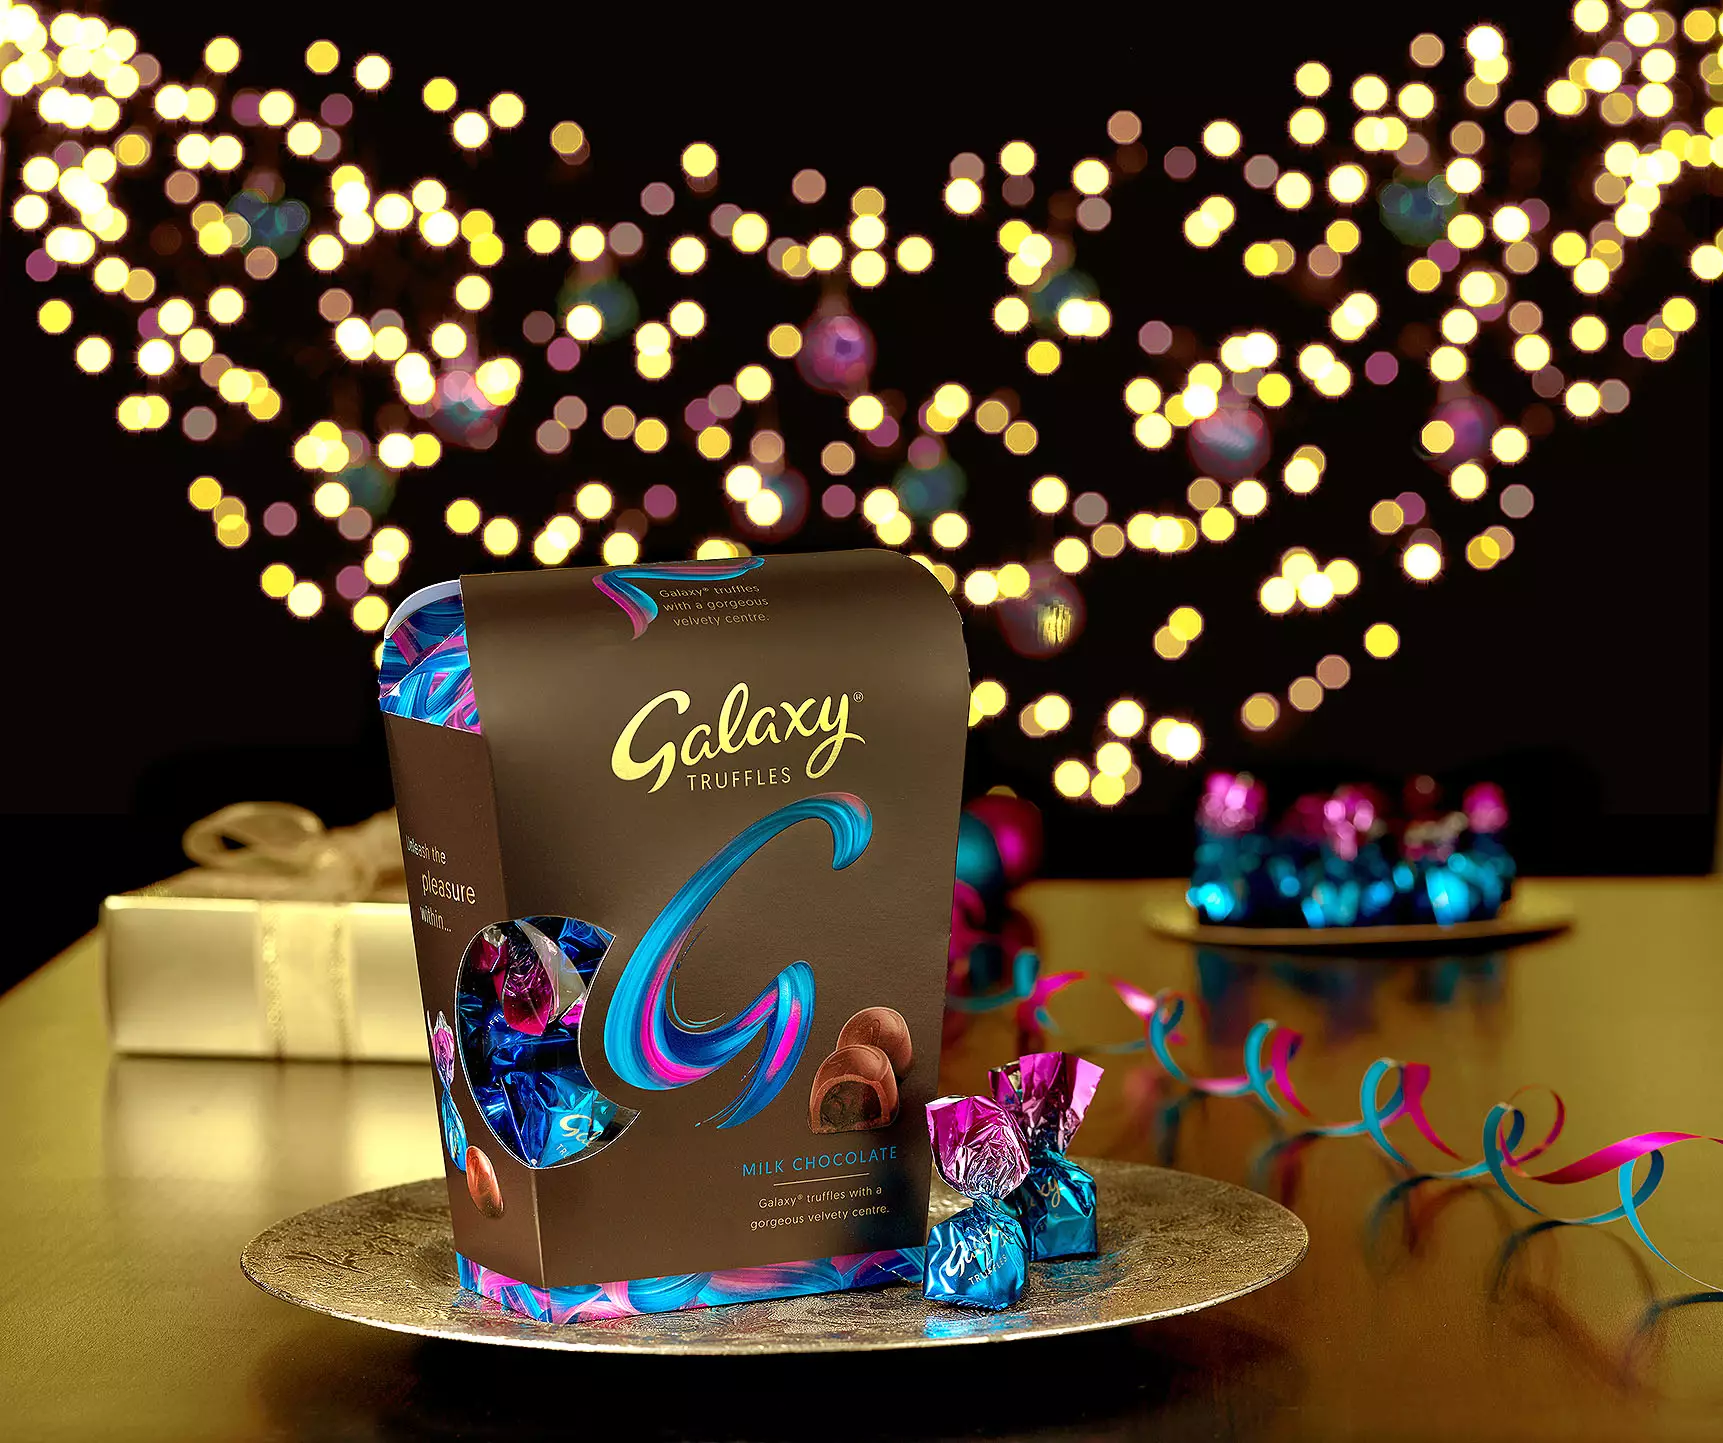 Galaxy Truffles are now available in a large gift box (